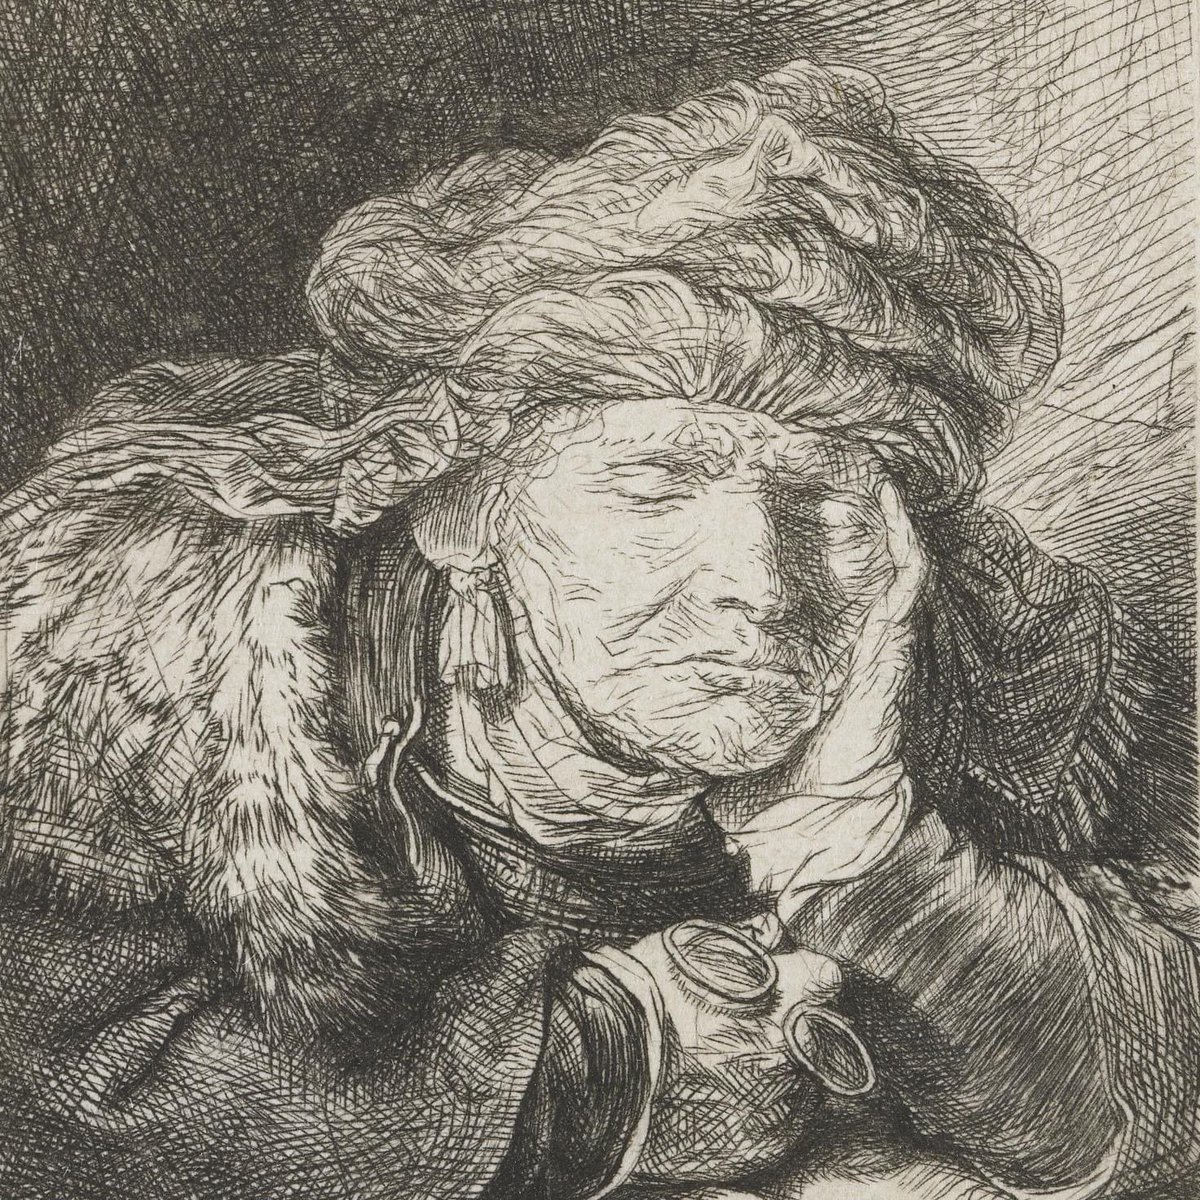 Rembrandt depicting our mood all day, every day... 💤 📸: Rembrandt, Oude slapende vrouw | Sleeping Old Woman, 1635/37.